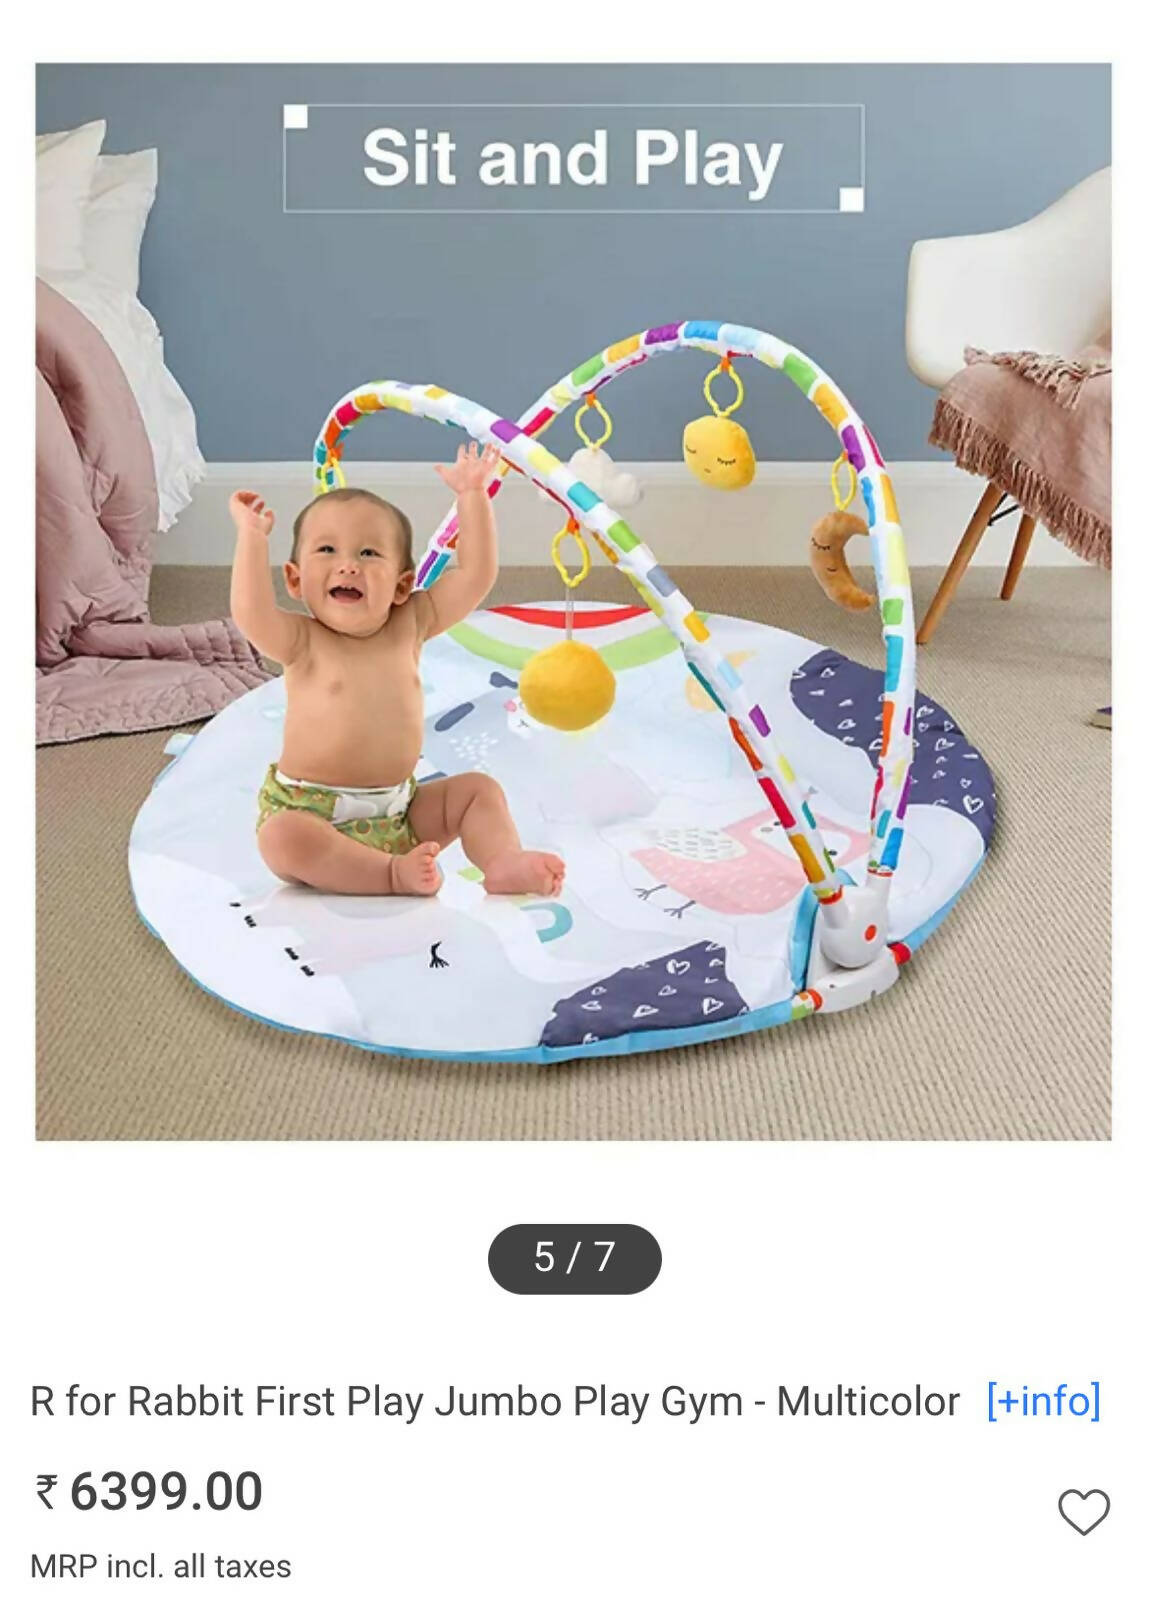 R FOR RABBIT First Play Jumbo Play Gym